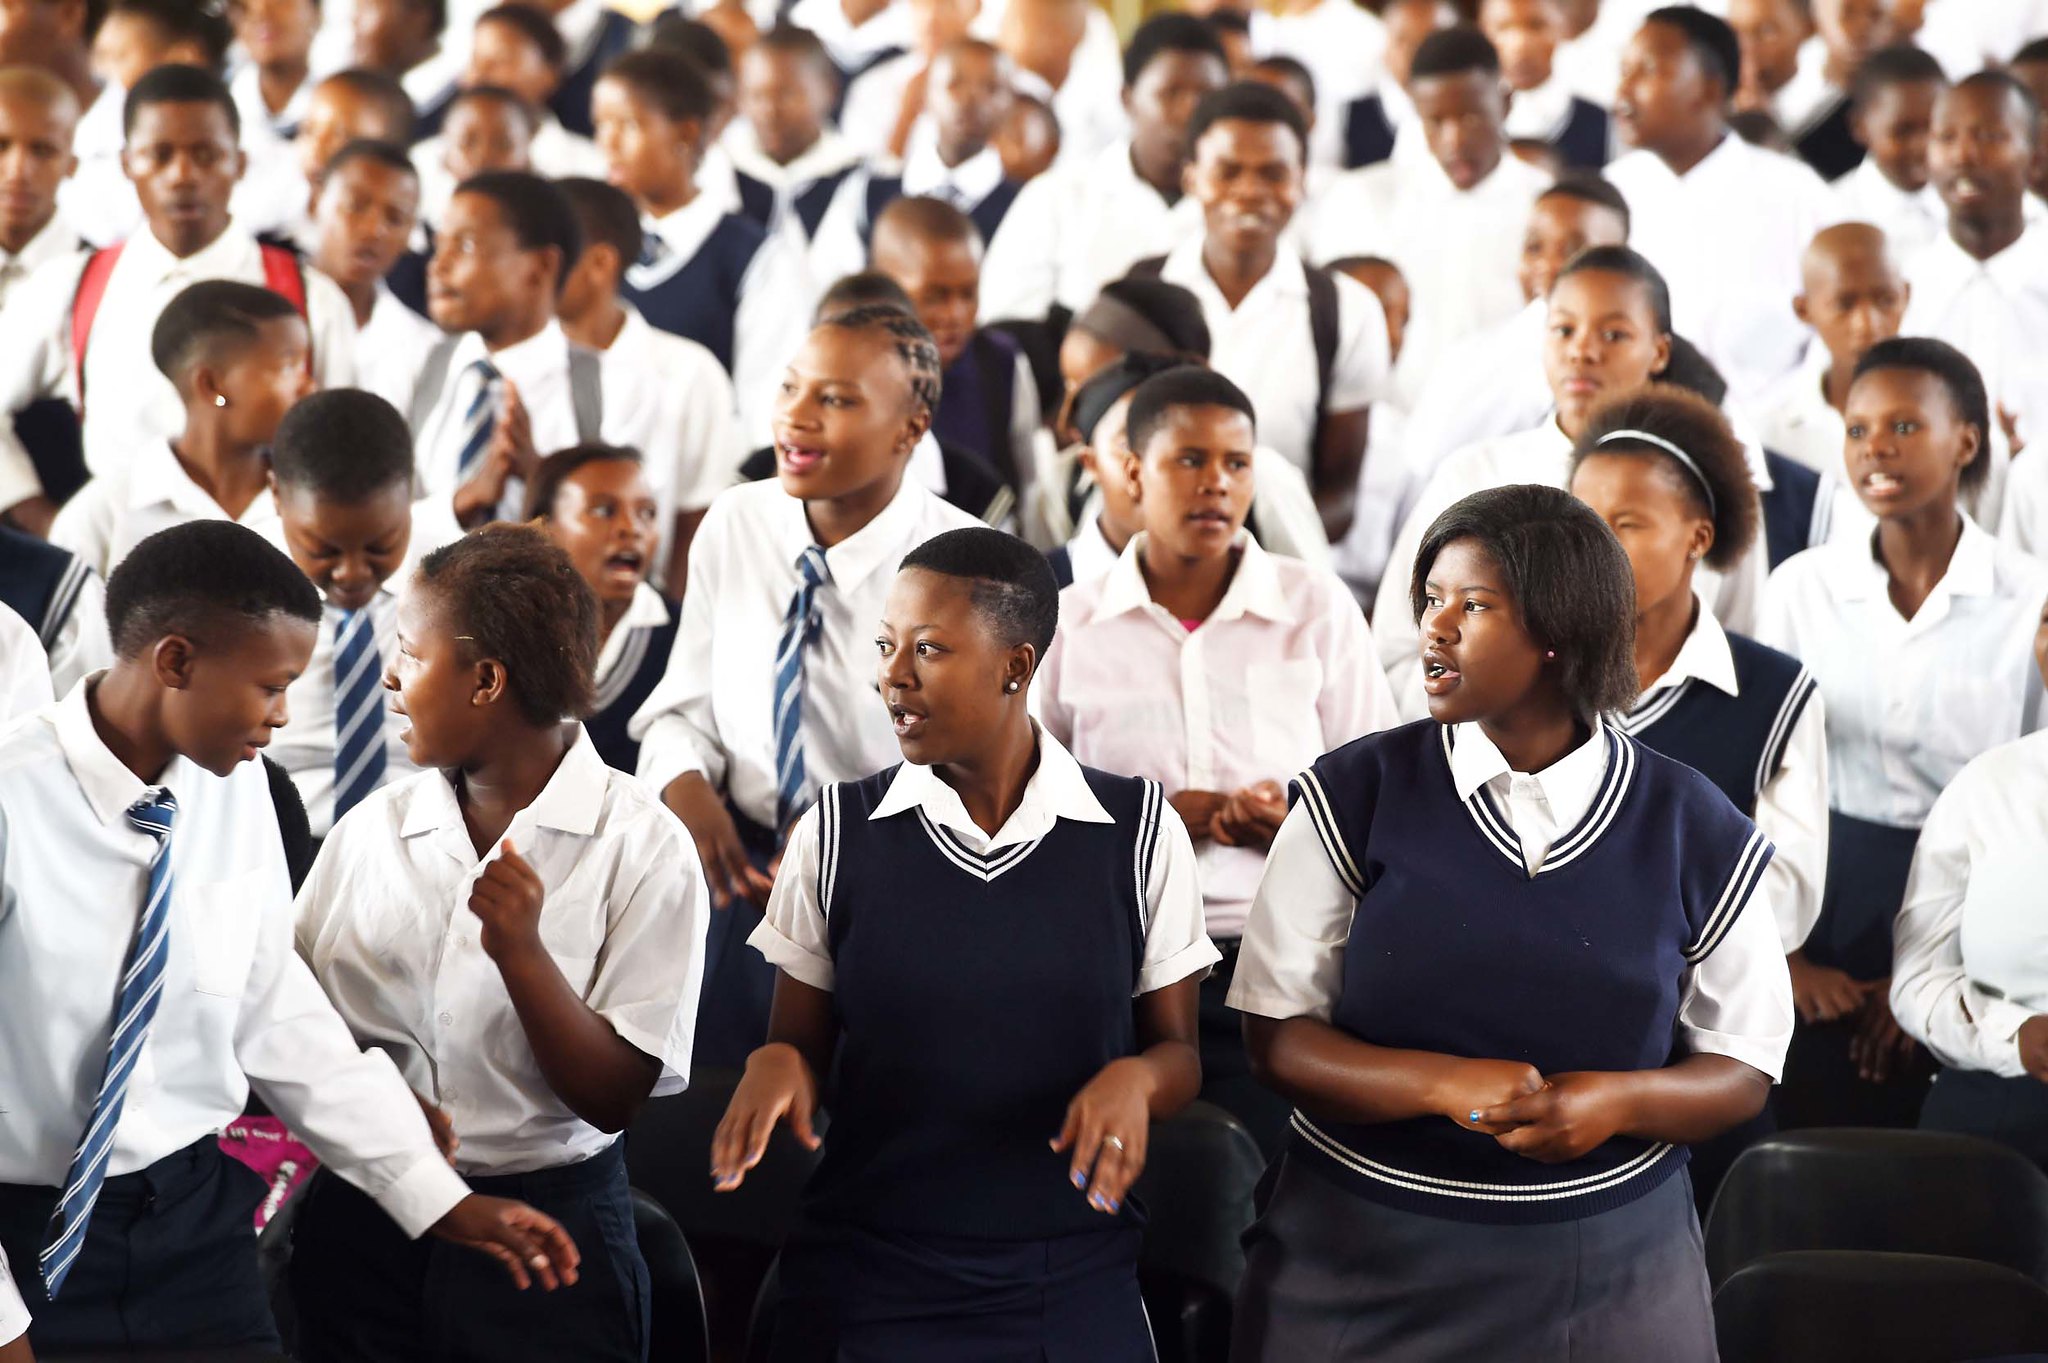 south-african-schools-will-re-open-on-1-june-2020-in-staggered-approach-sapeople-worldwide